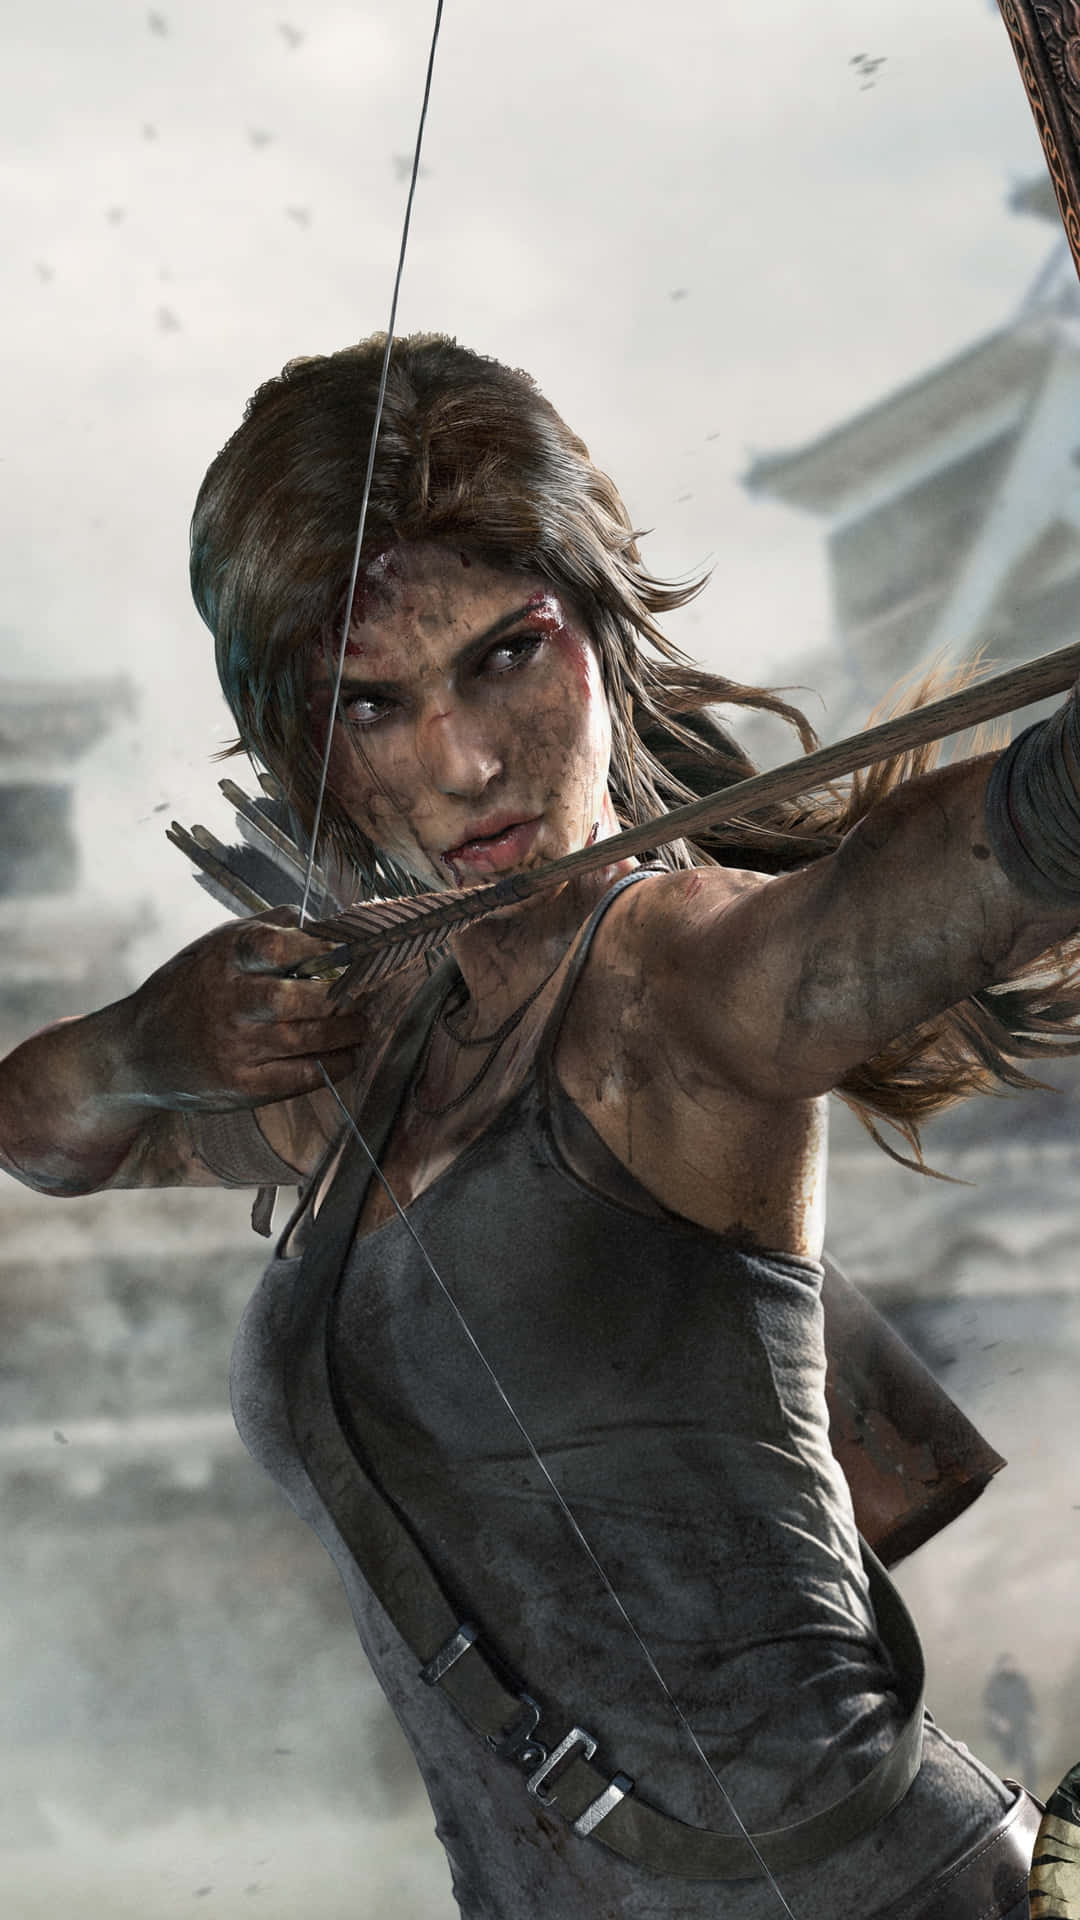 Get Ready To Slay With The Tomb Raider Iphone 5s Wallpaper